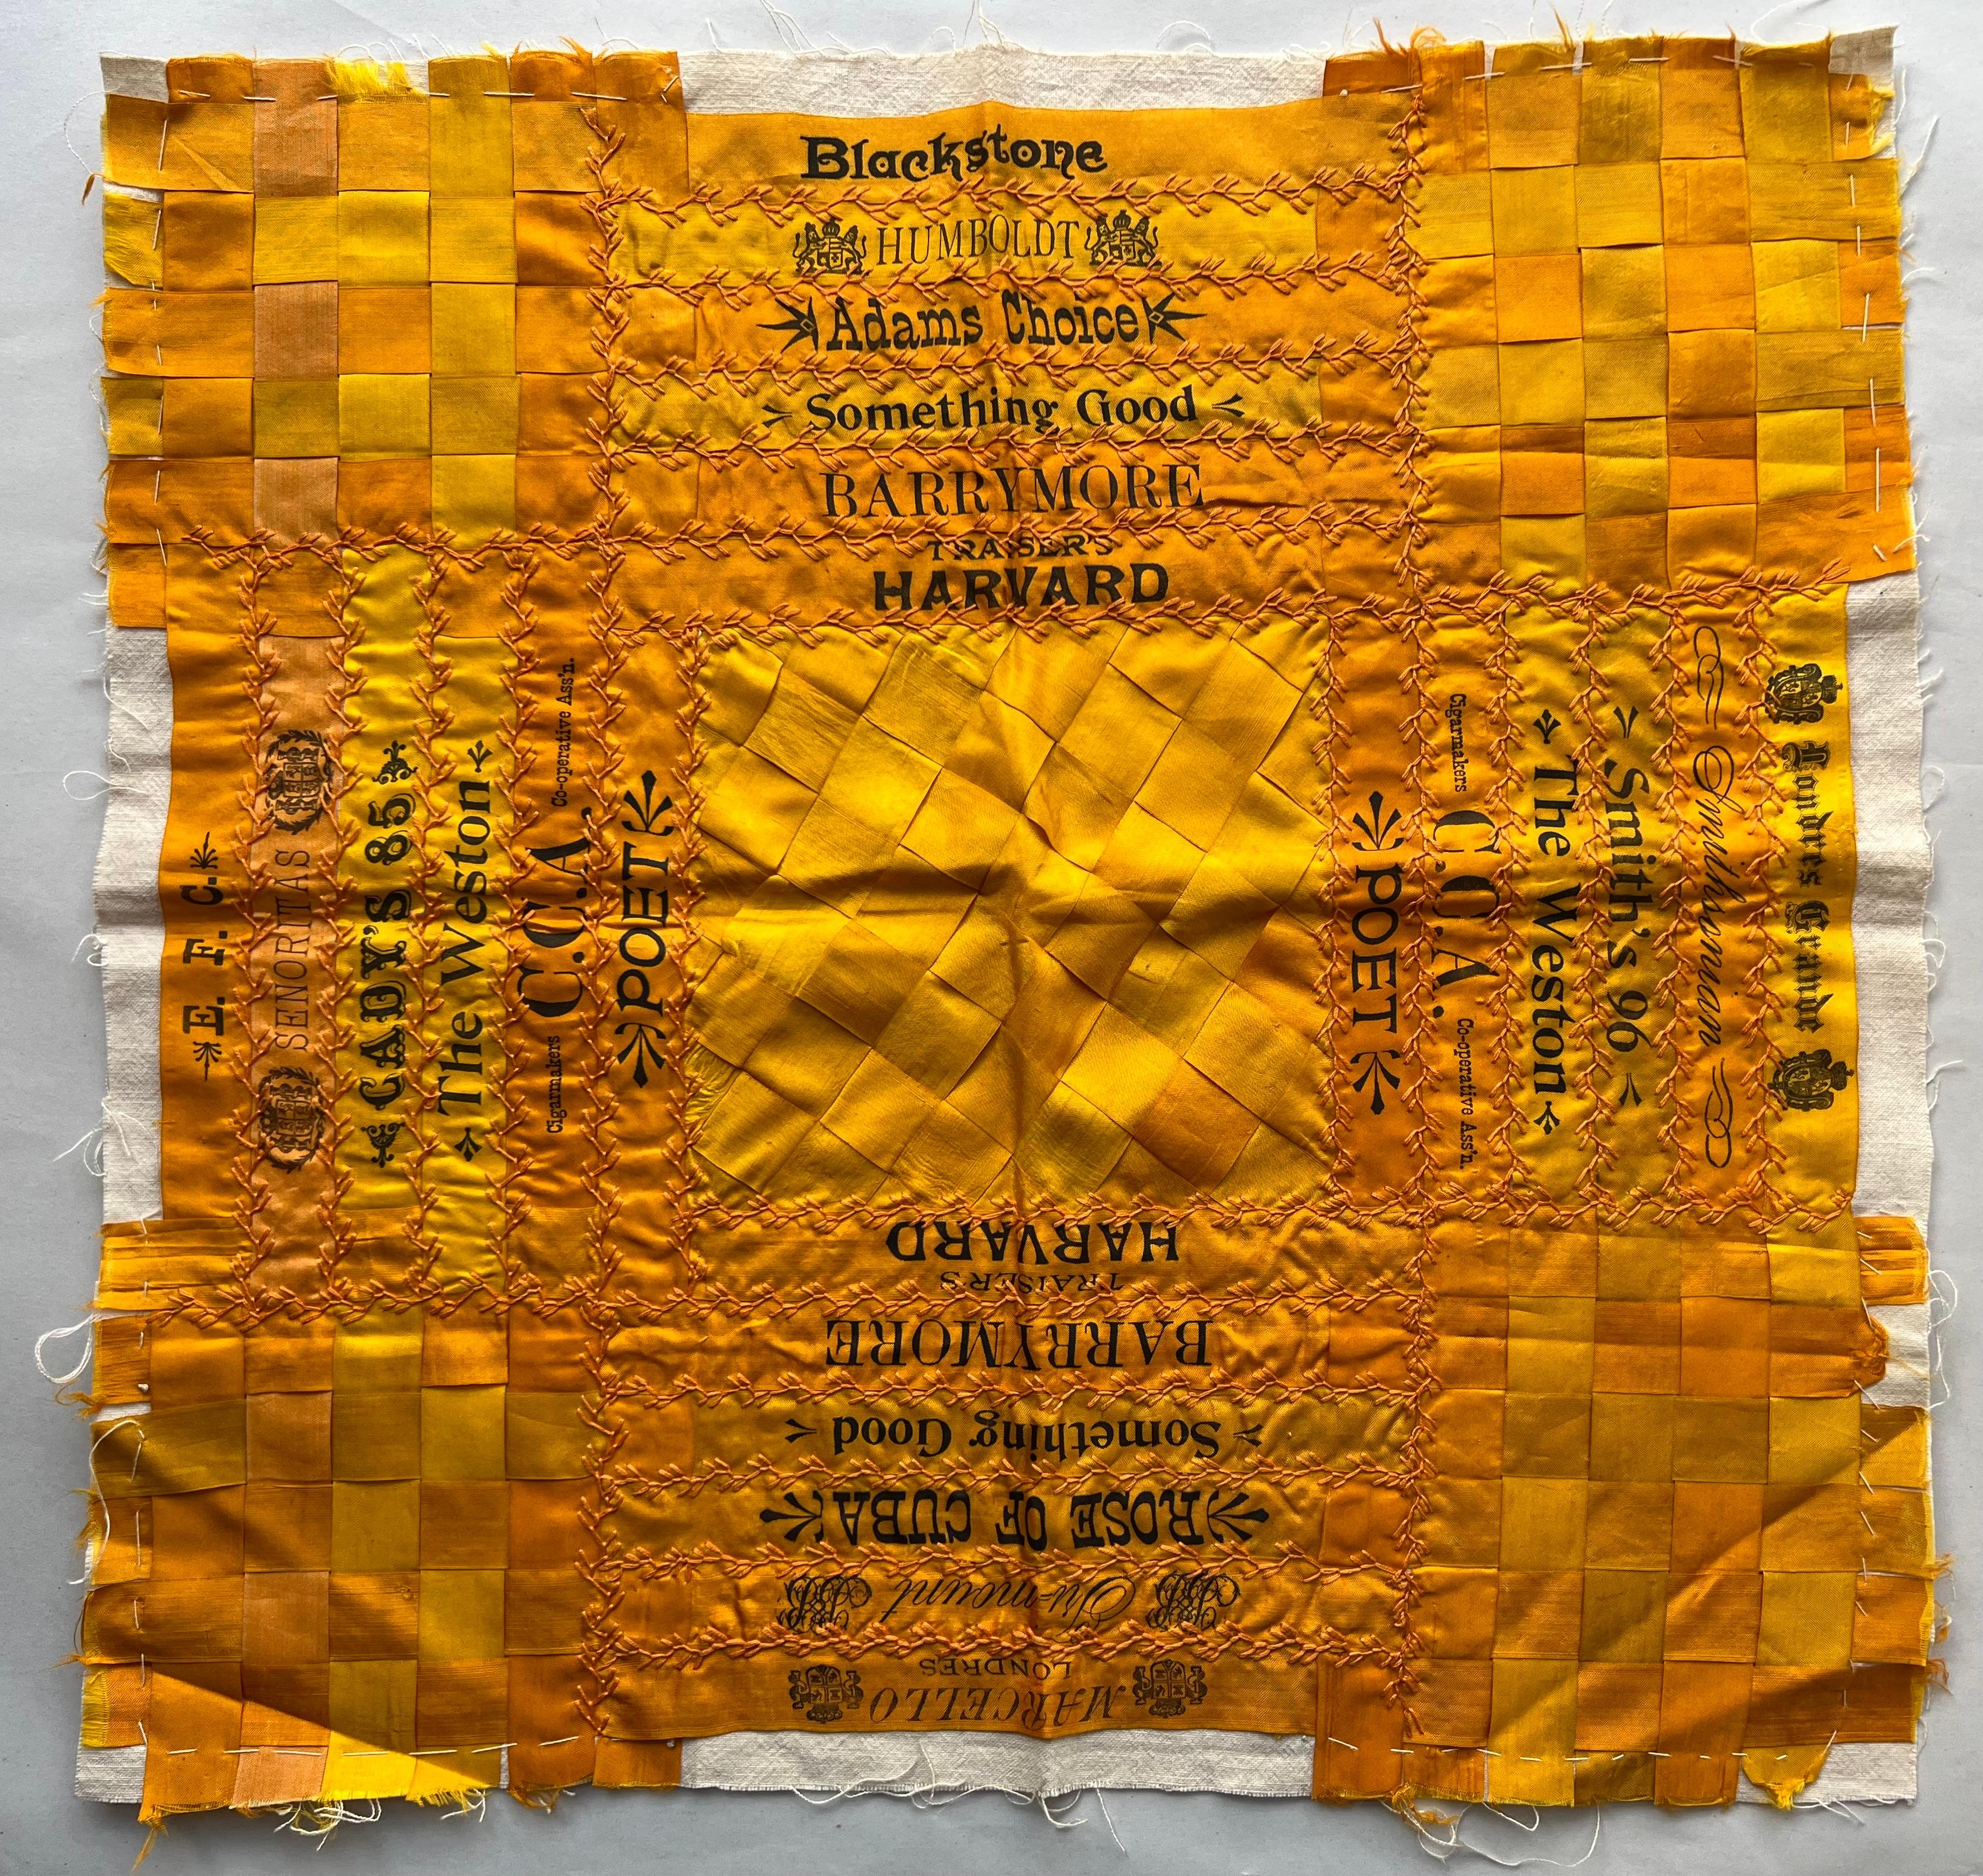 Offered here is a circa 1890s-1910s silk cigar ribbon, hand embroidered quilt block.
These ribbons started out wrapping bunches of cigars, with the brand names printed
on the ribbons.
Starting in the victorian era woman saved them, and then in